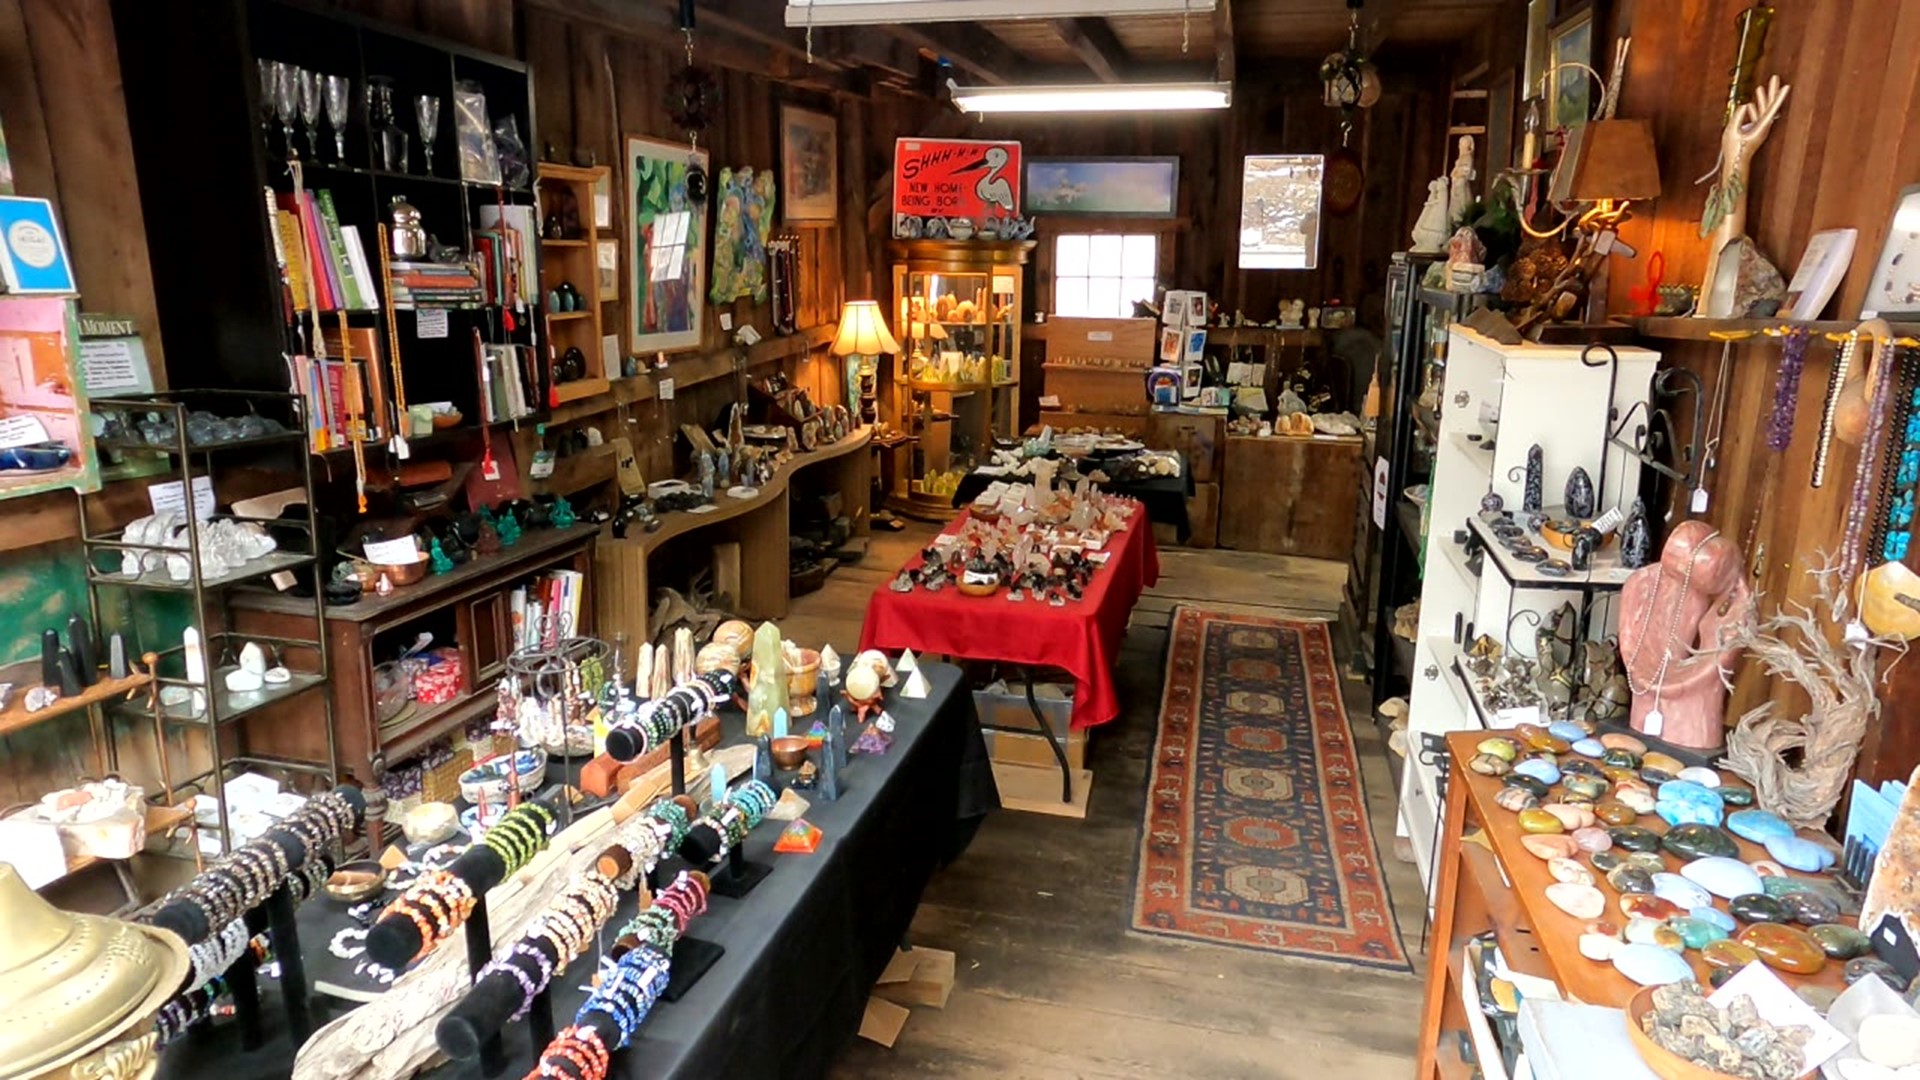 A businessman in Wyoming County has amassed an impressive collection of rocks, minerals, and crystals. And some folks are seeking them out for their benefits.